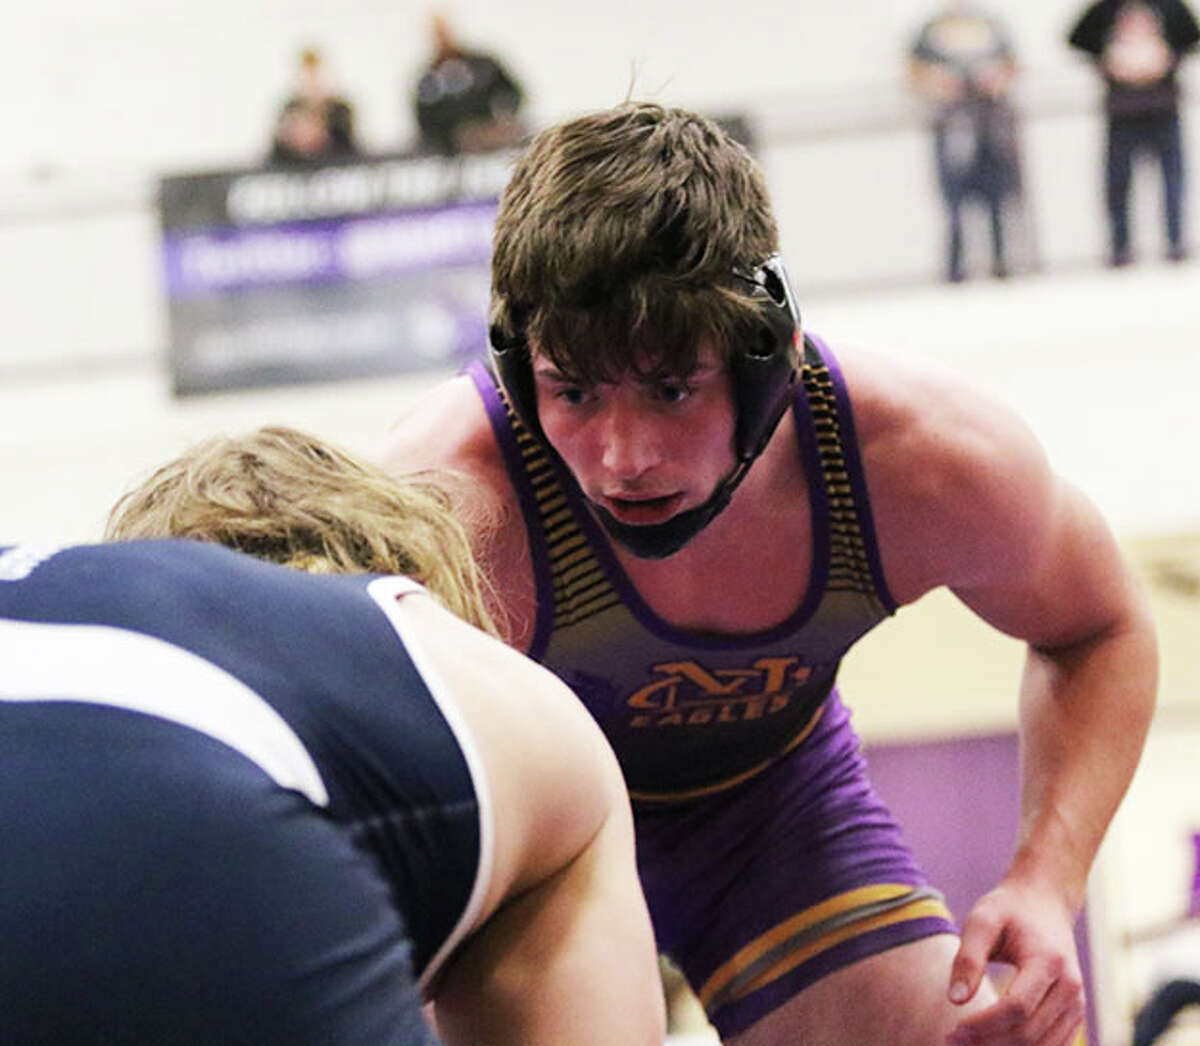 CM senior Colton Carlisle (right) eyes his 182-pound opponent in title bout at the Mascoutah Tourney last month. On Saturday, Carlisle bumped up to 192 pounds and won the title at the Geneseo Tourney to improve his record to 26-2.